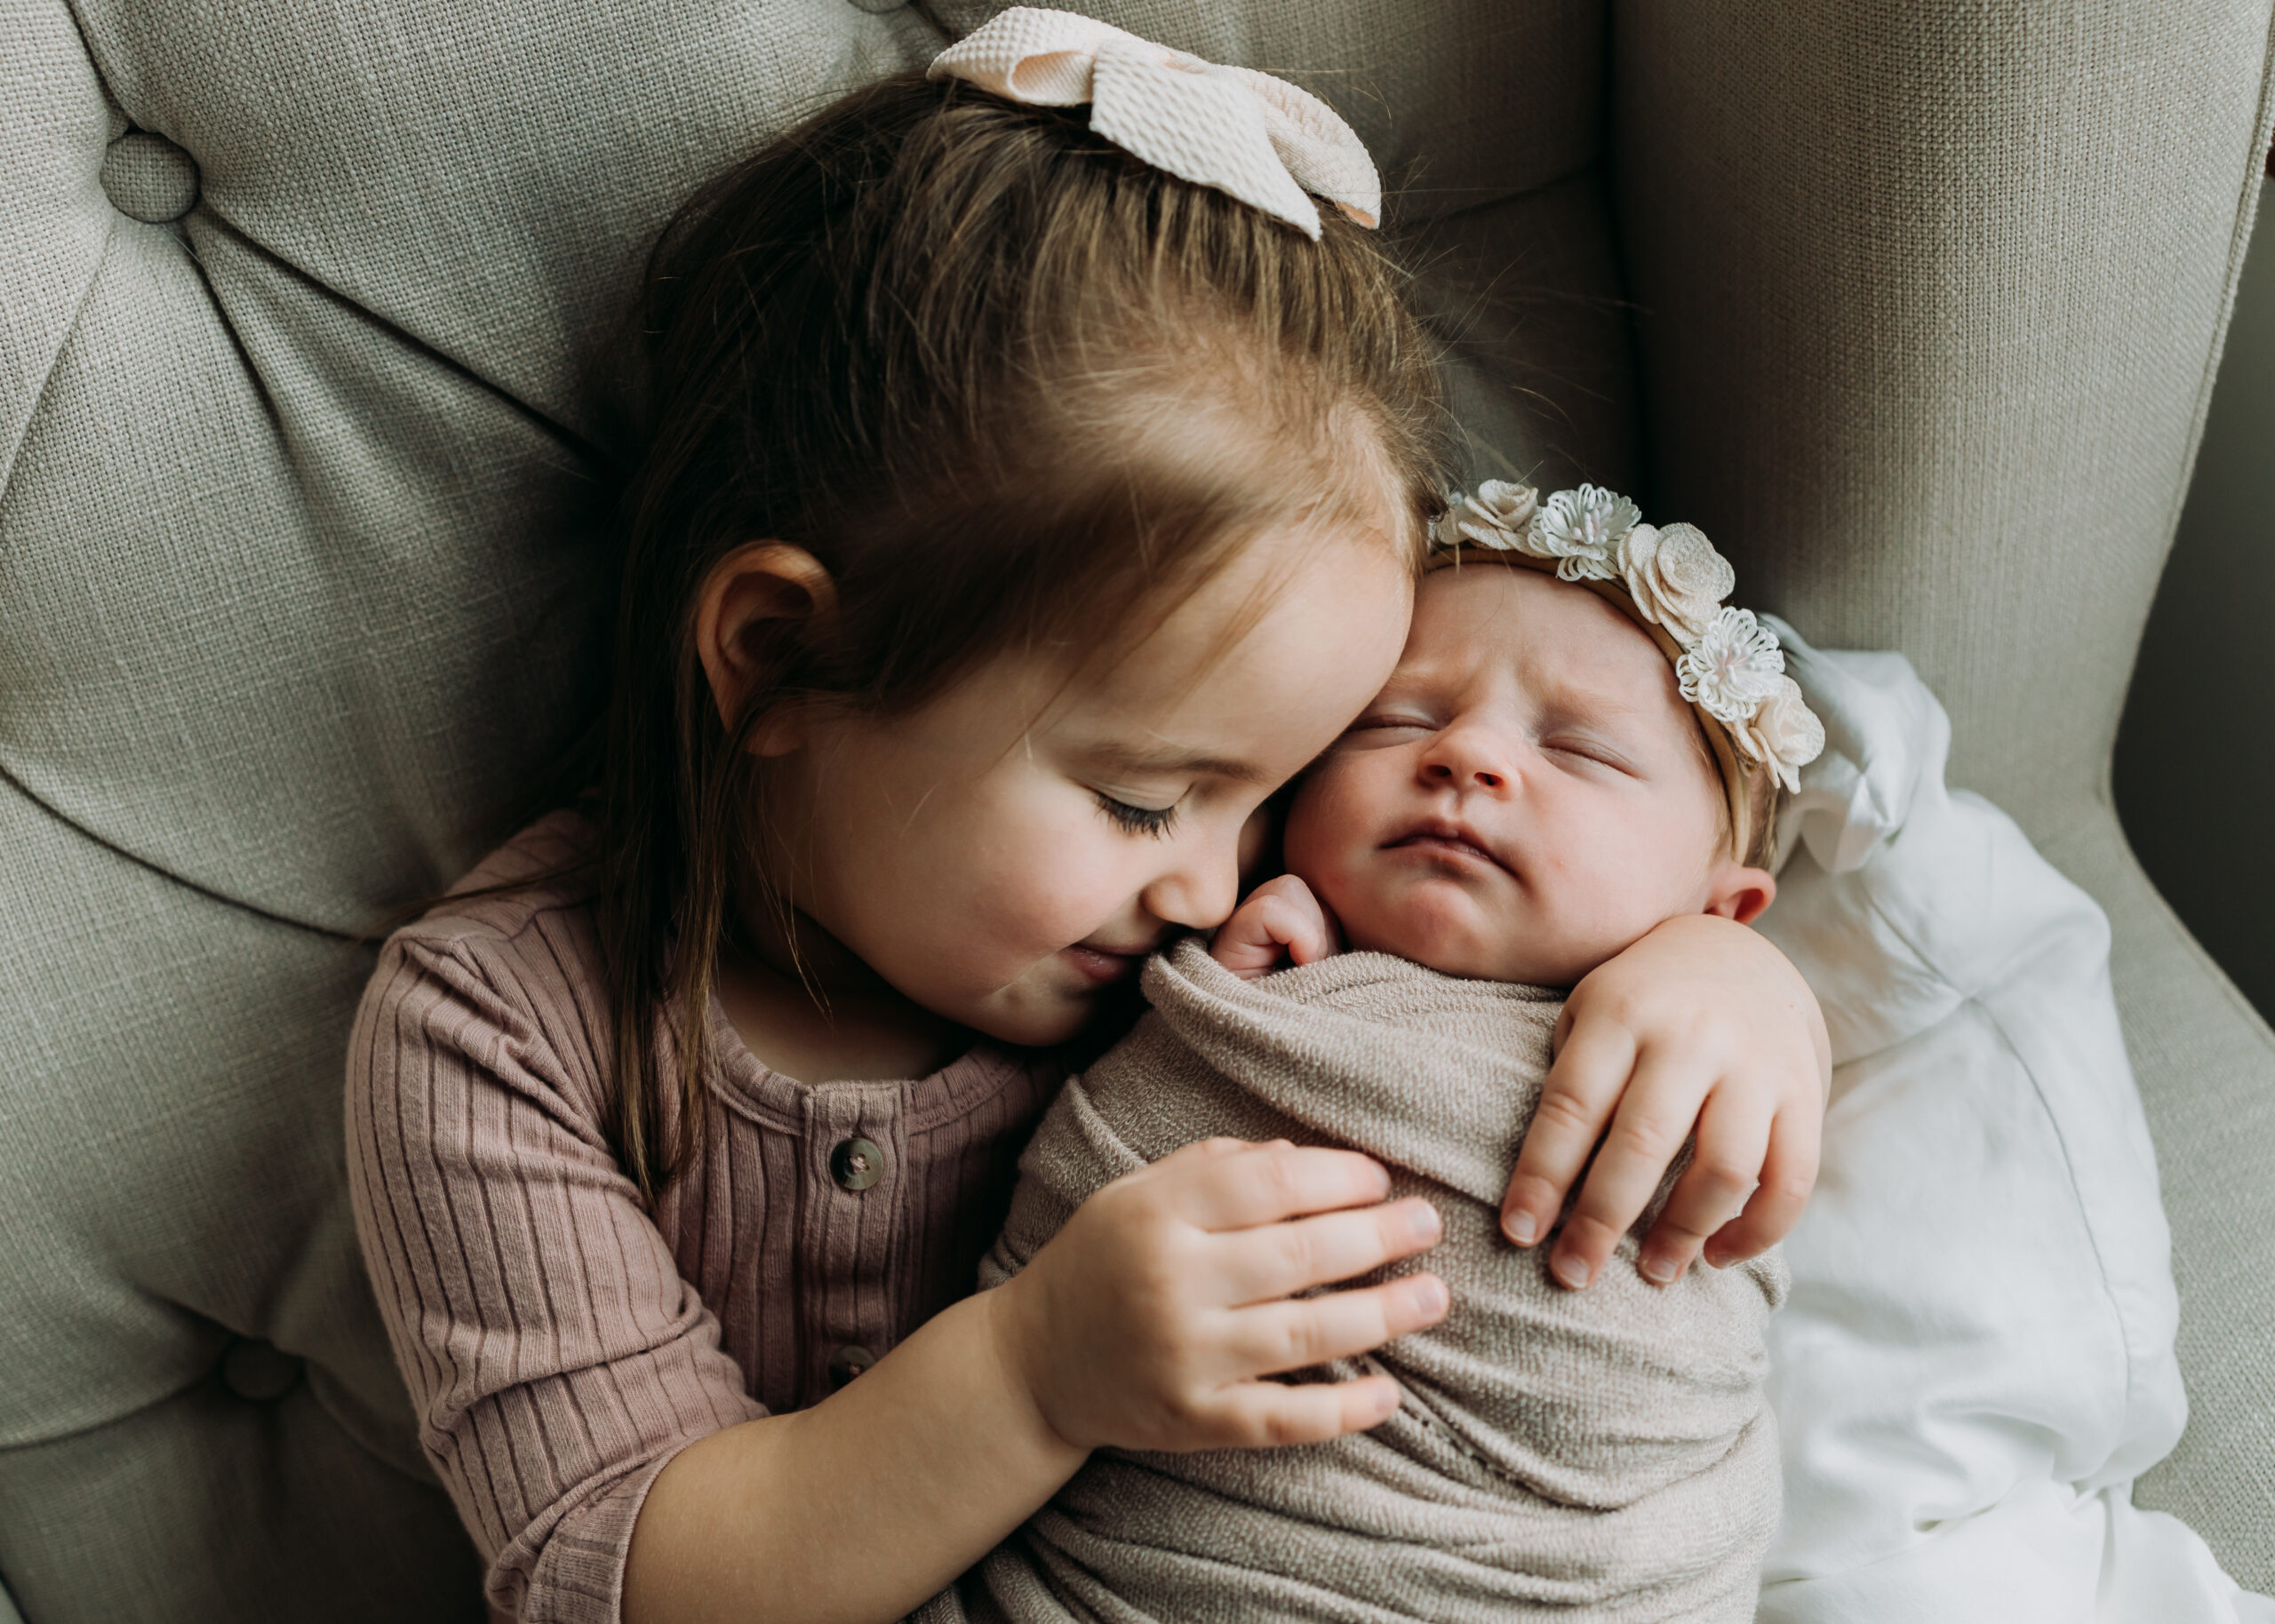 Toddler holding her baby sister for newborn photos at home